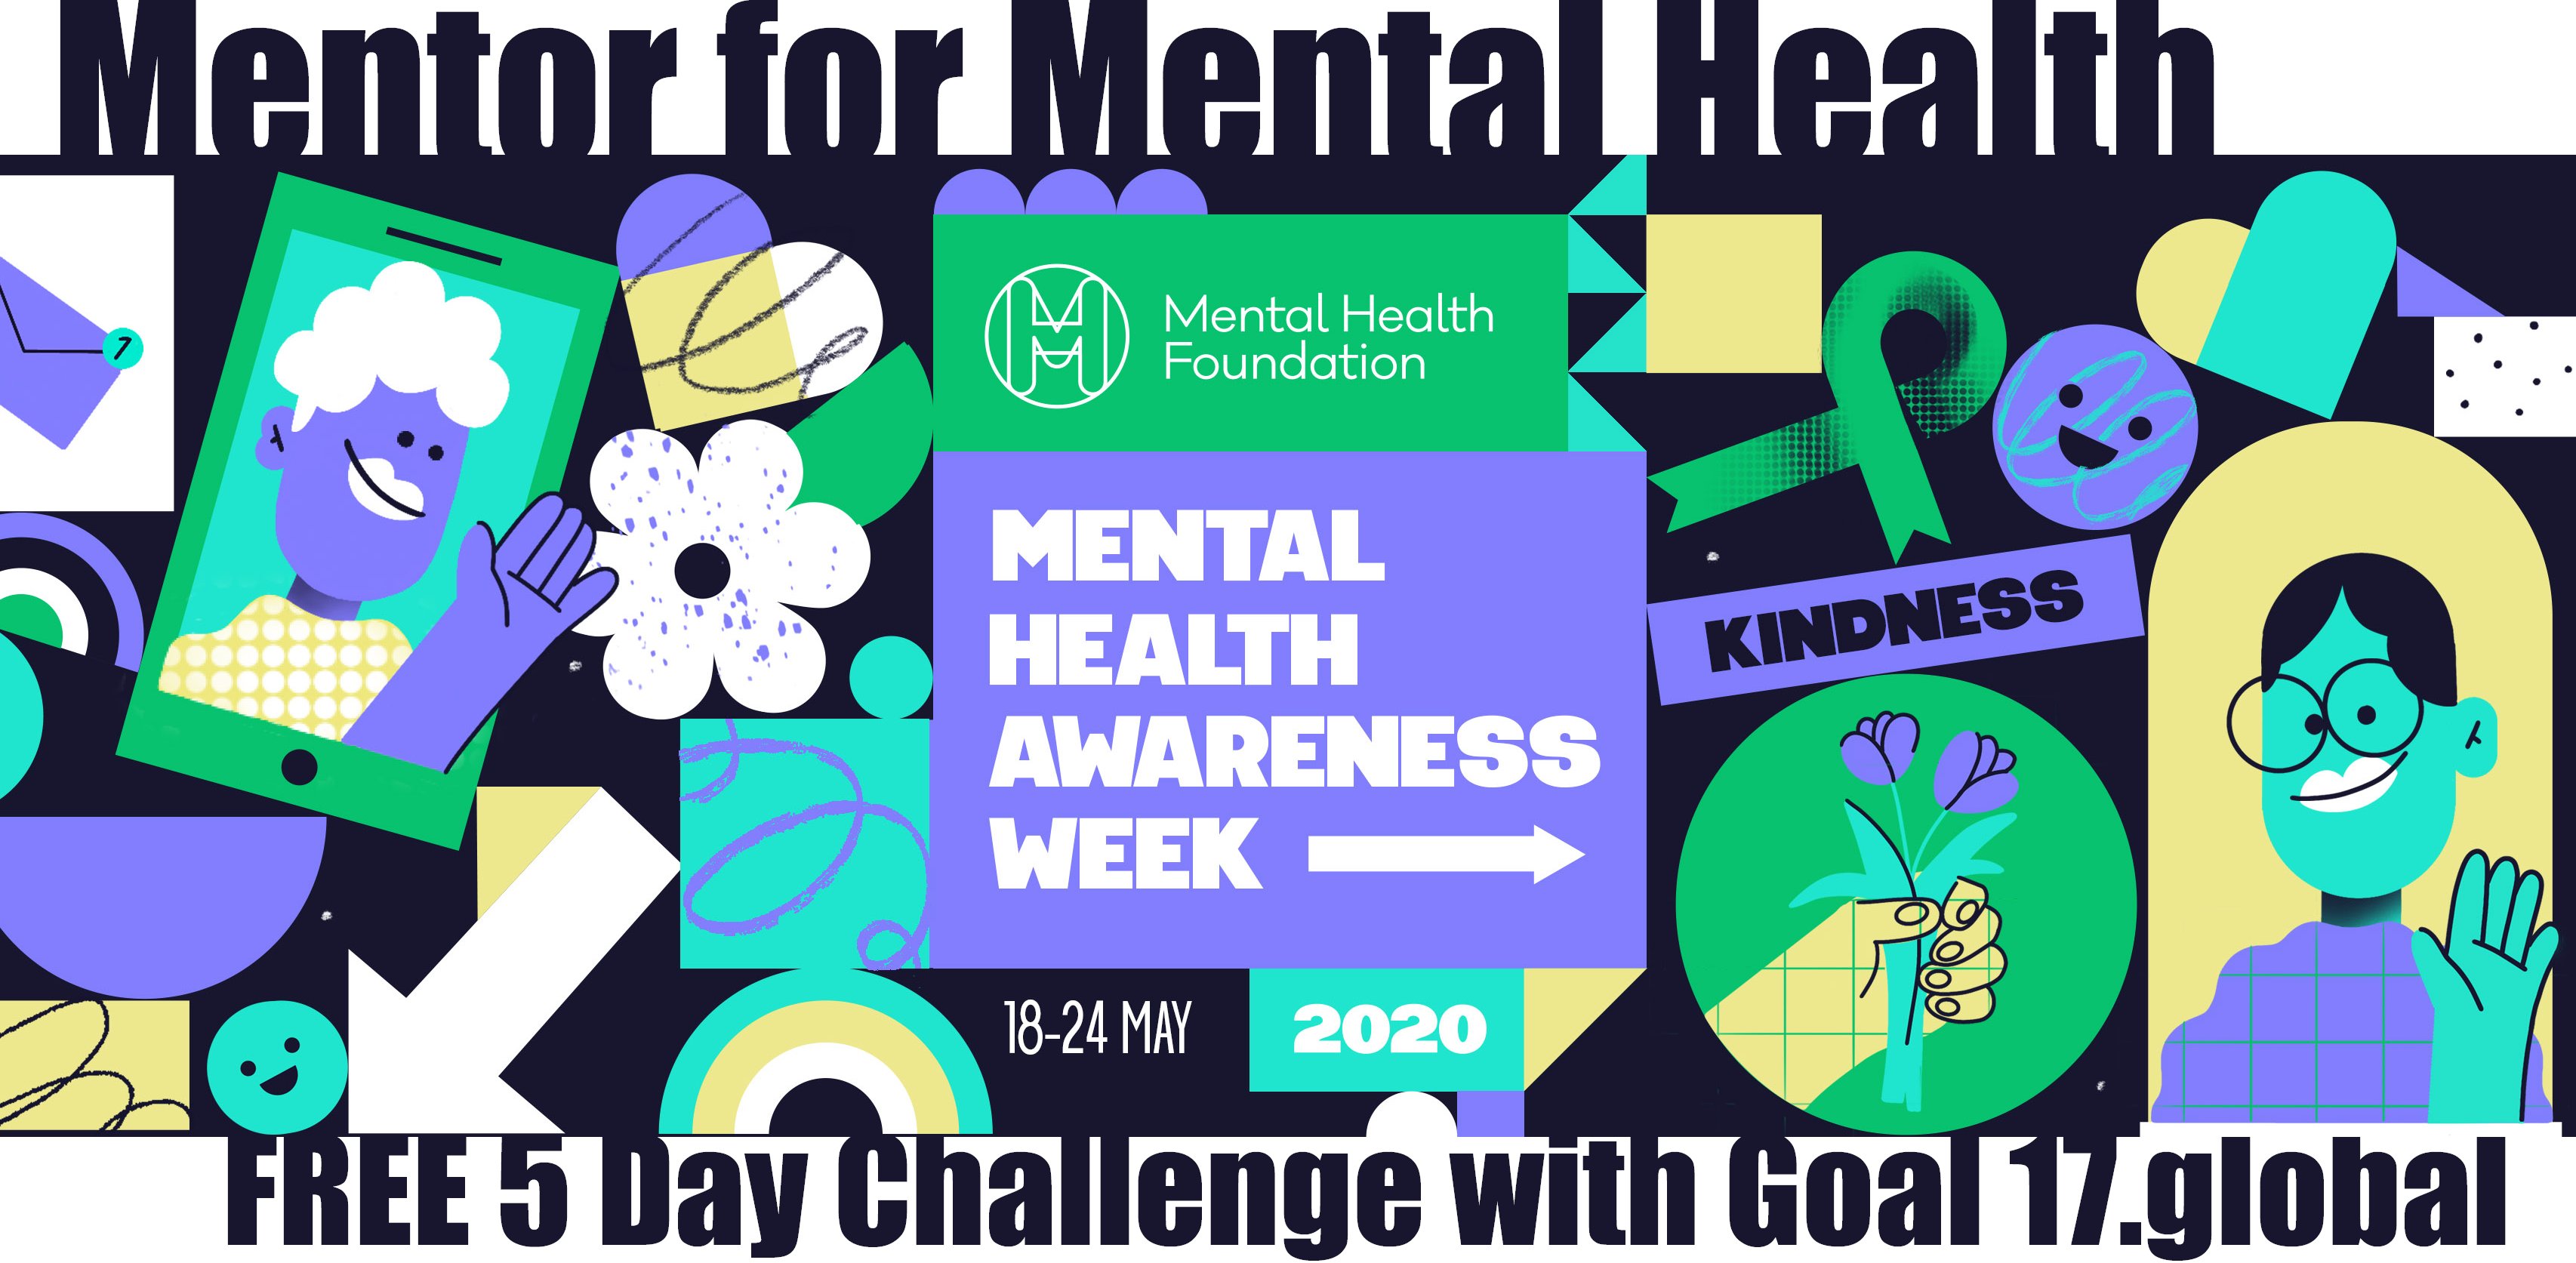 Goal17 "FREE 5 day Mentor for Mental Health Challenge to support - discover the step by step process of # mentoring #kindness to improve both #mentor & mentee #mentalhealth. Learn